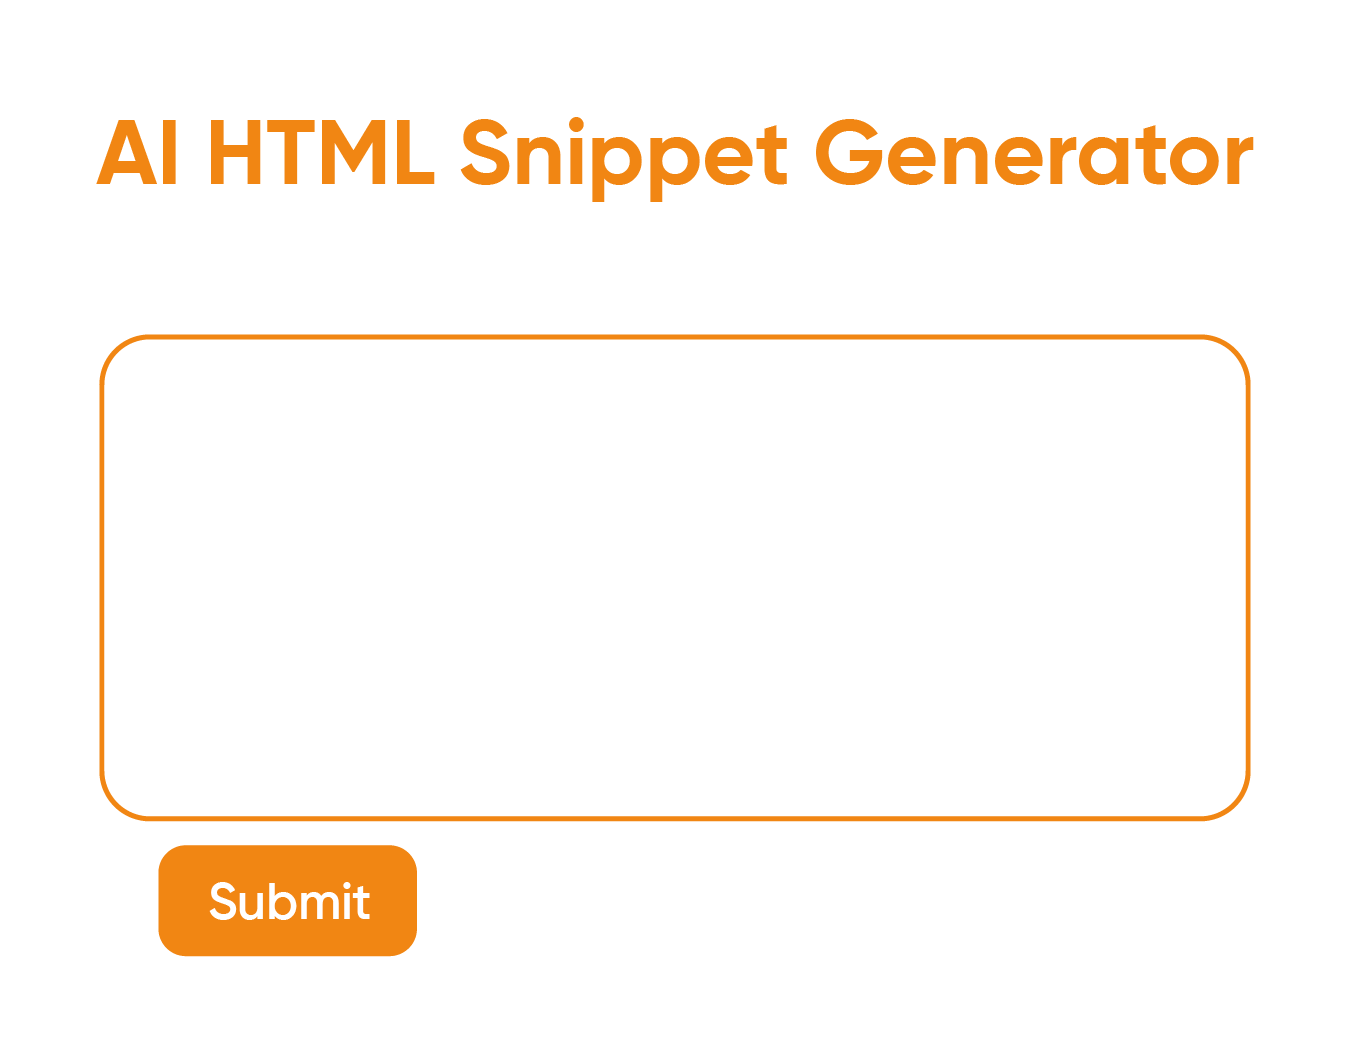 How to use Ettvi's AI HTML Snippet